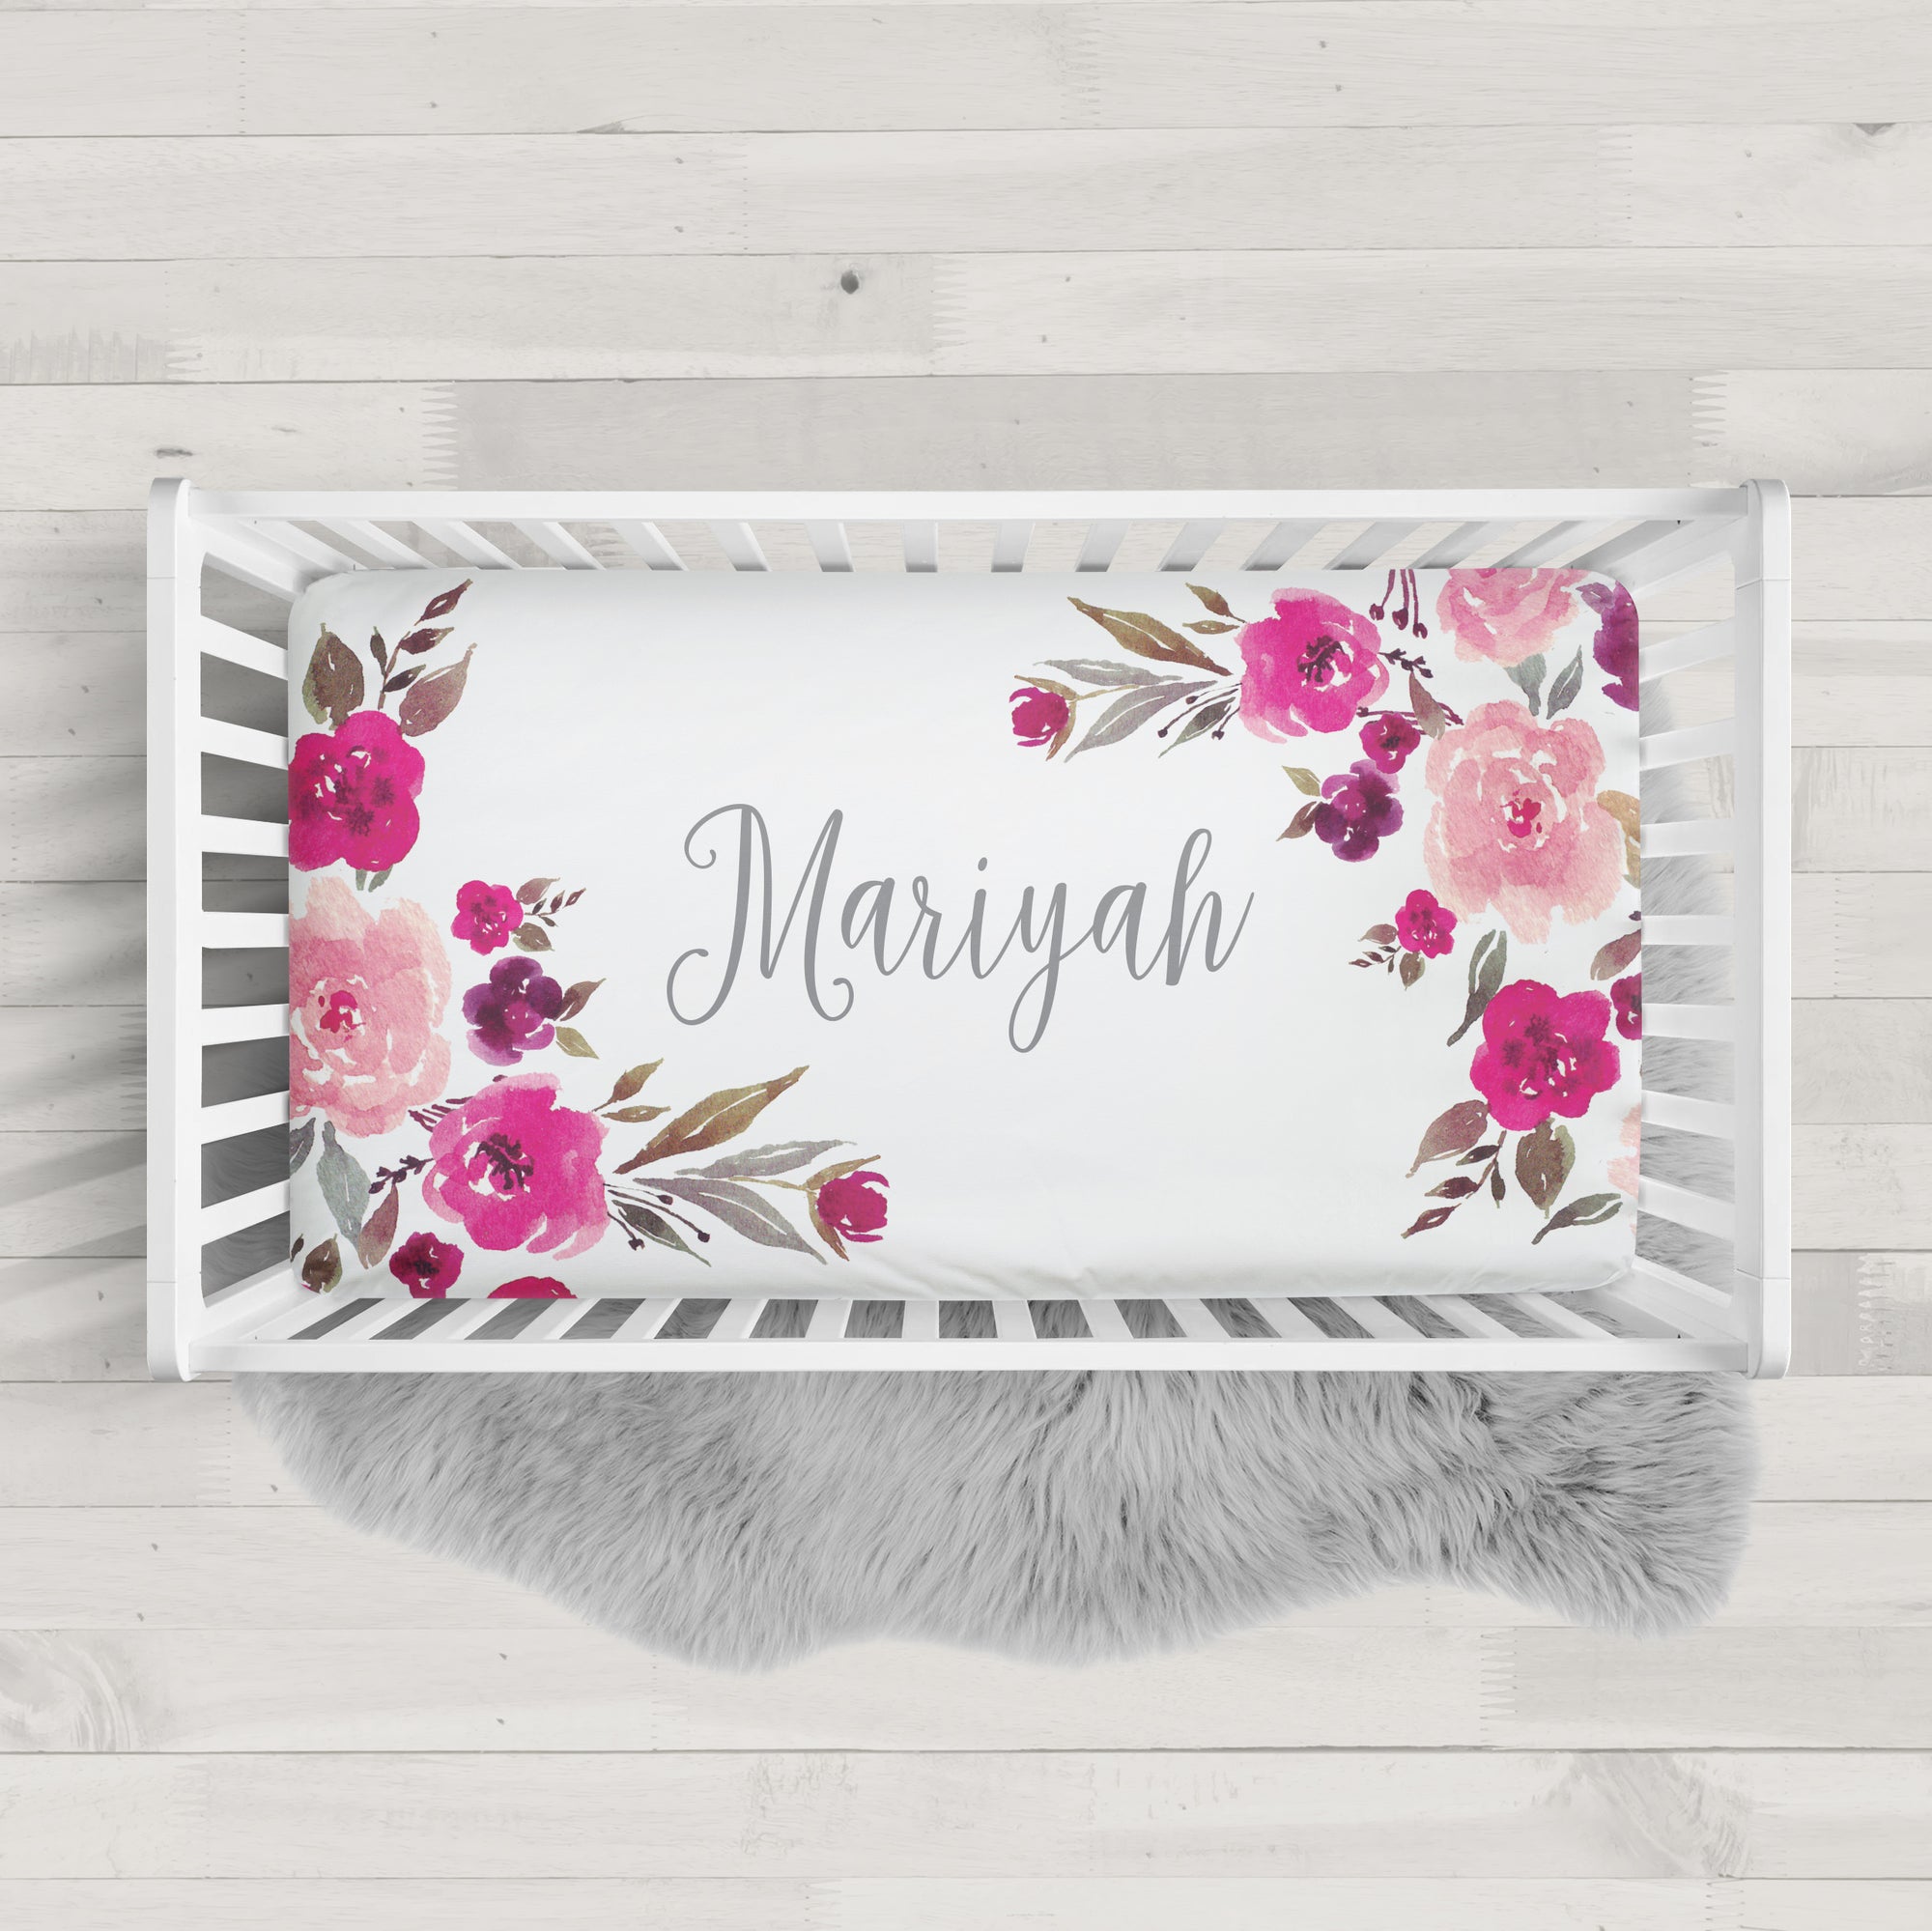 Personalized Crib Sheet with Pink Watercolor Flowers | PIPSY.COM